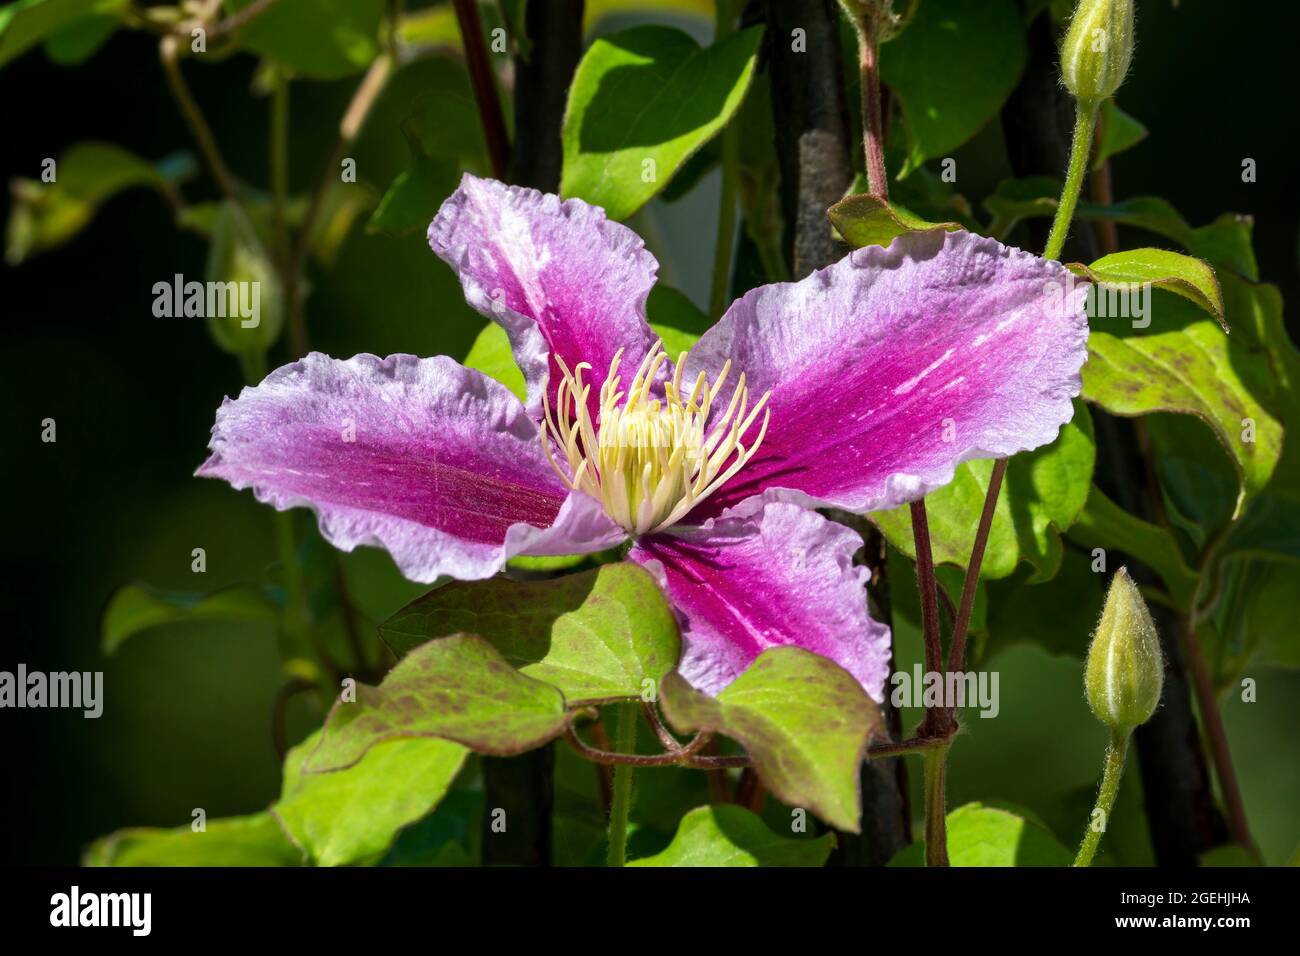 Clematis 'Piilua' spring summer flowering plant with a pink purple summertime flower, stock photo image Stock Photo